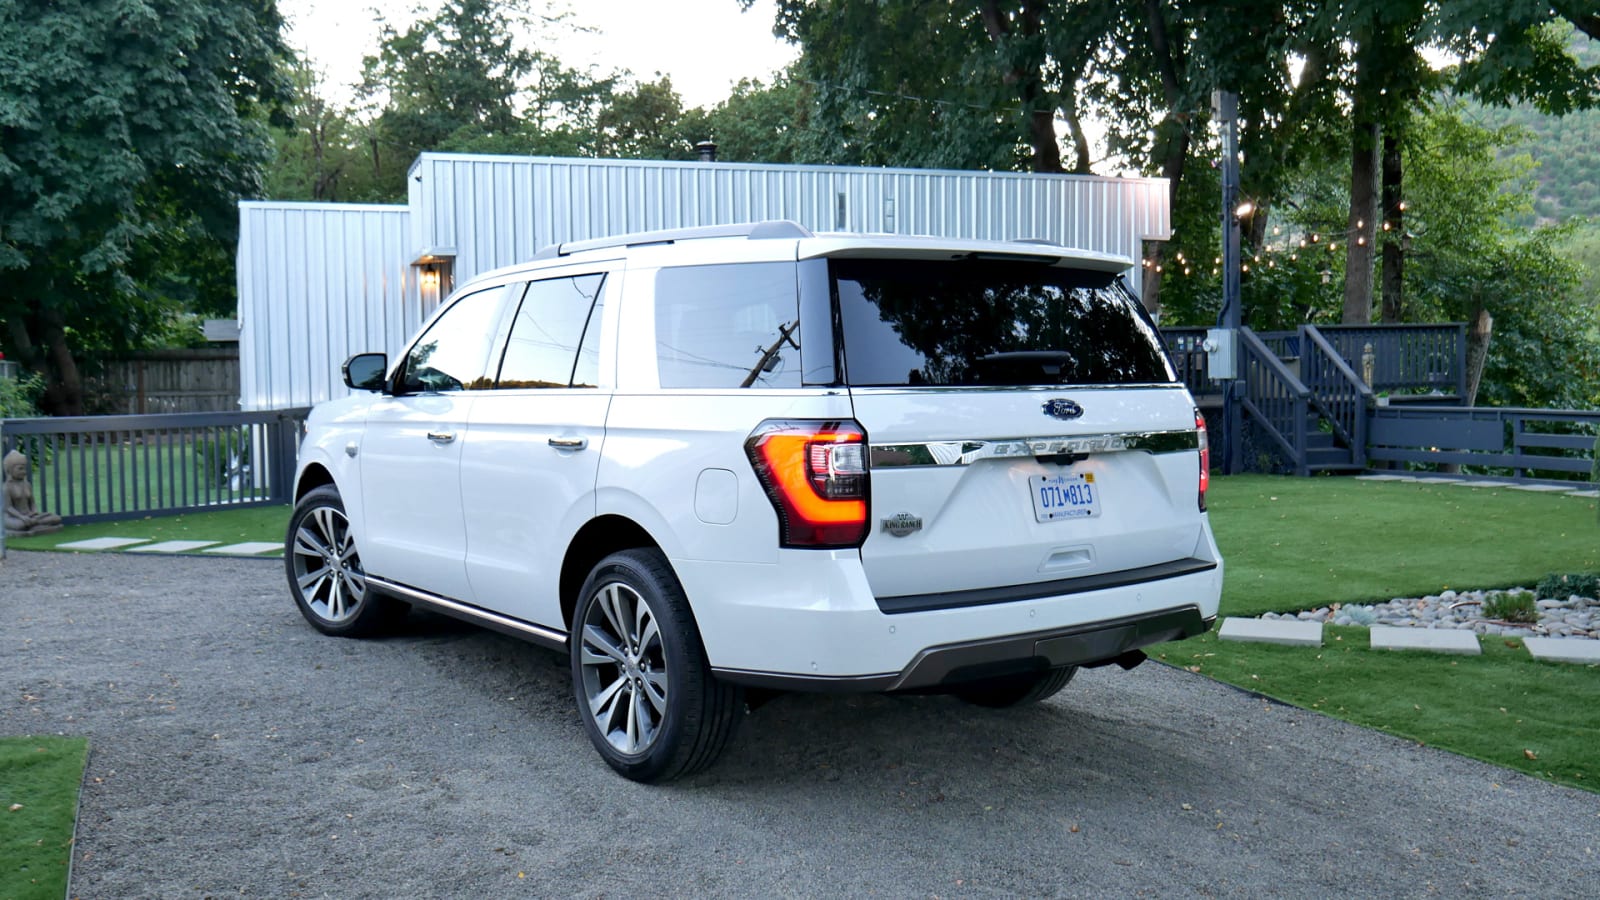 2023 Ford Expedition Review: No V8 and better for it